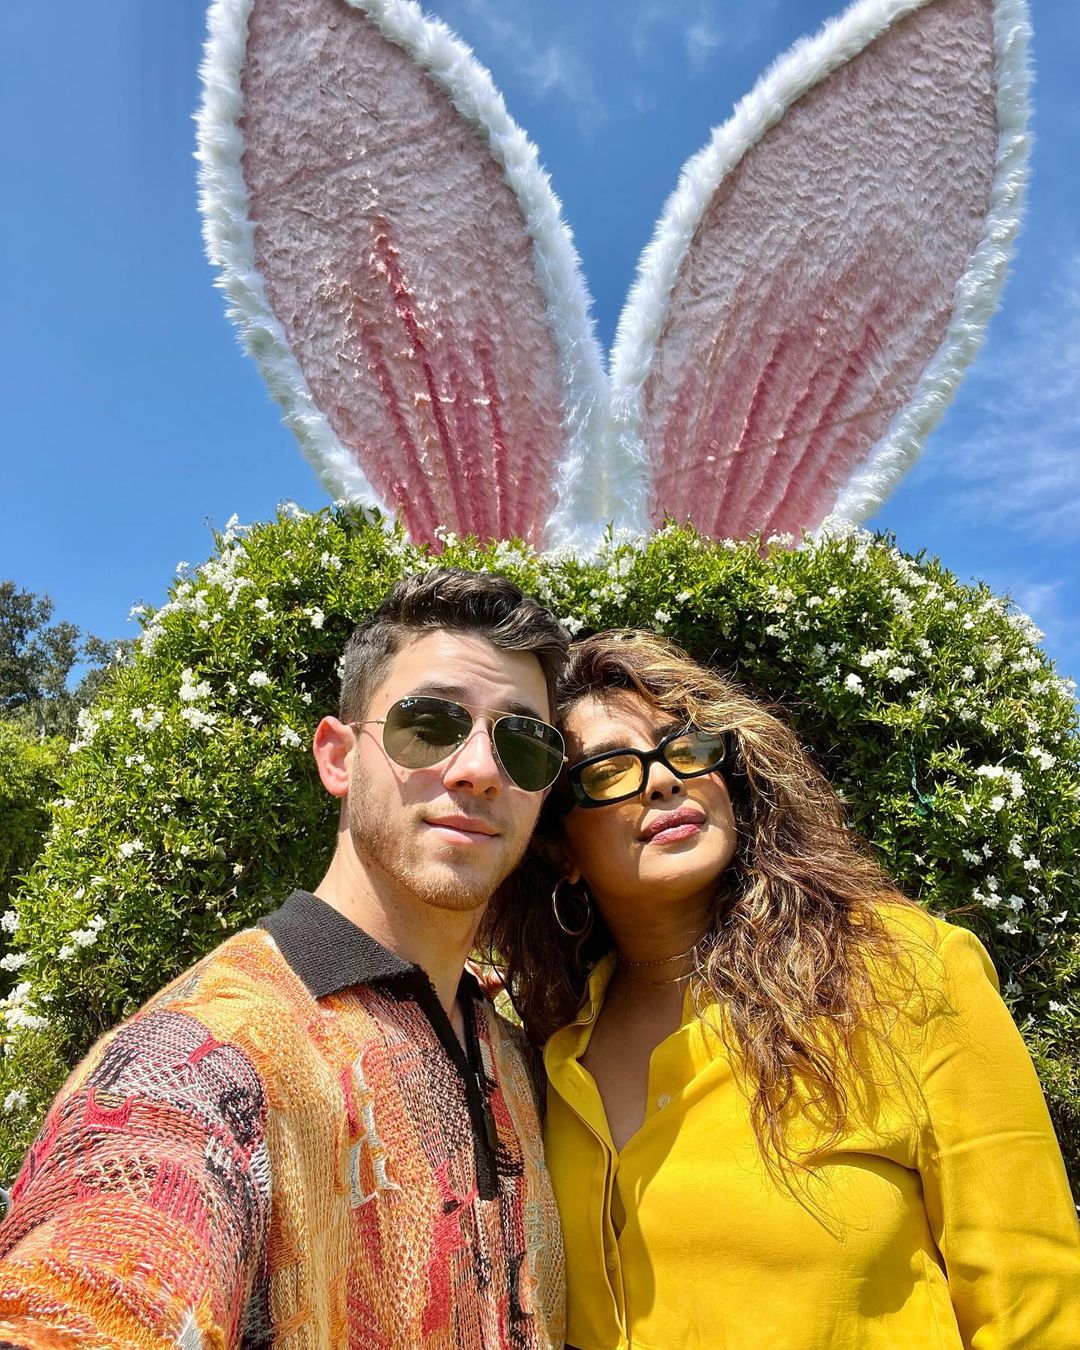 One thing that the global celebrity couple is known for is celebrating festivals together. In this photo, the duo shared the warm greetings of Easter by literally being bunnies. (Image: Instagram)